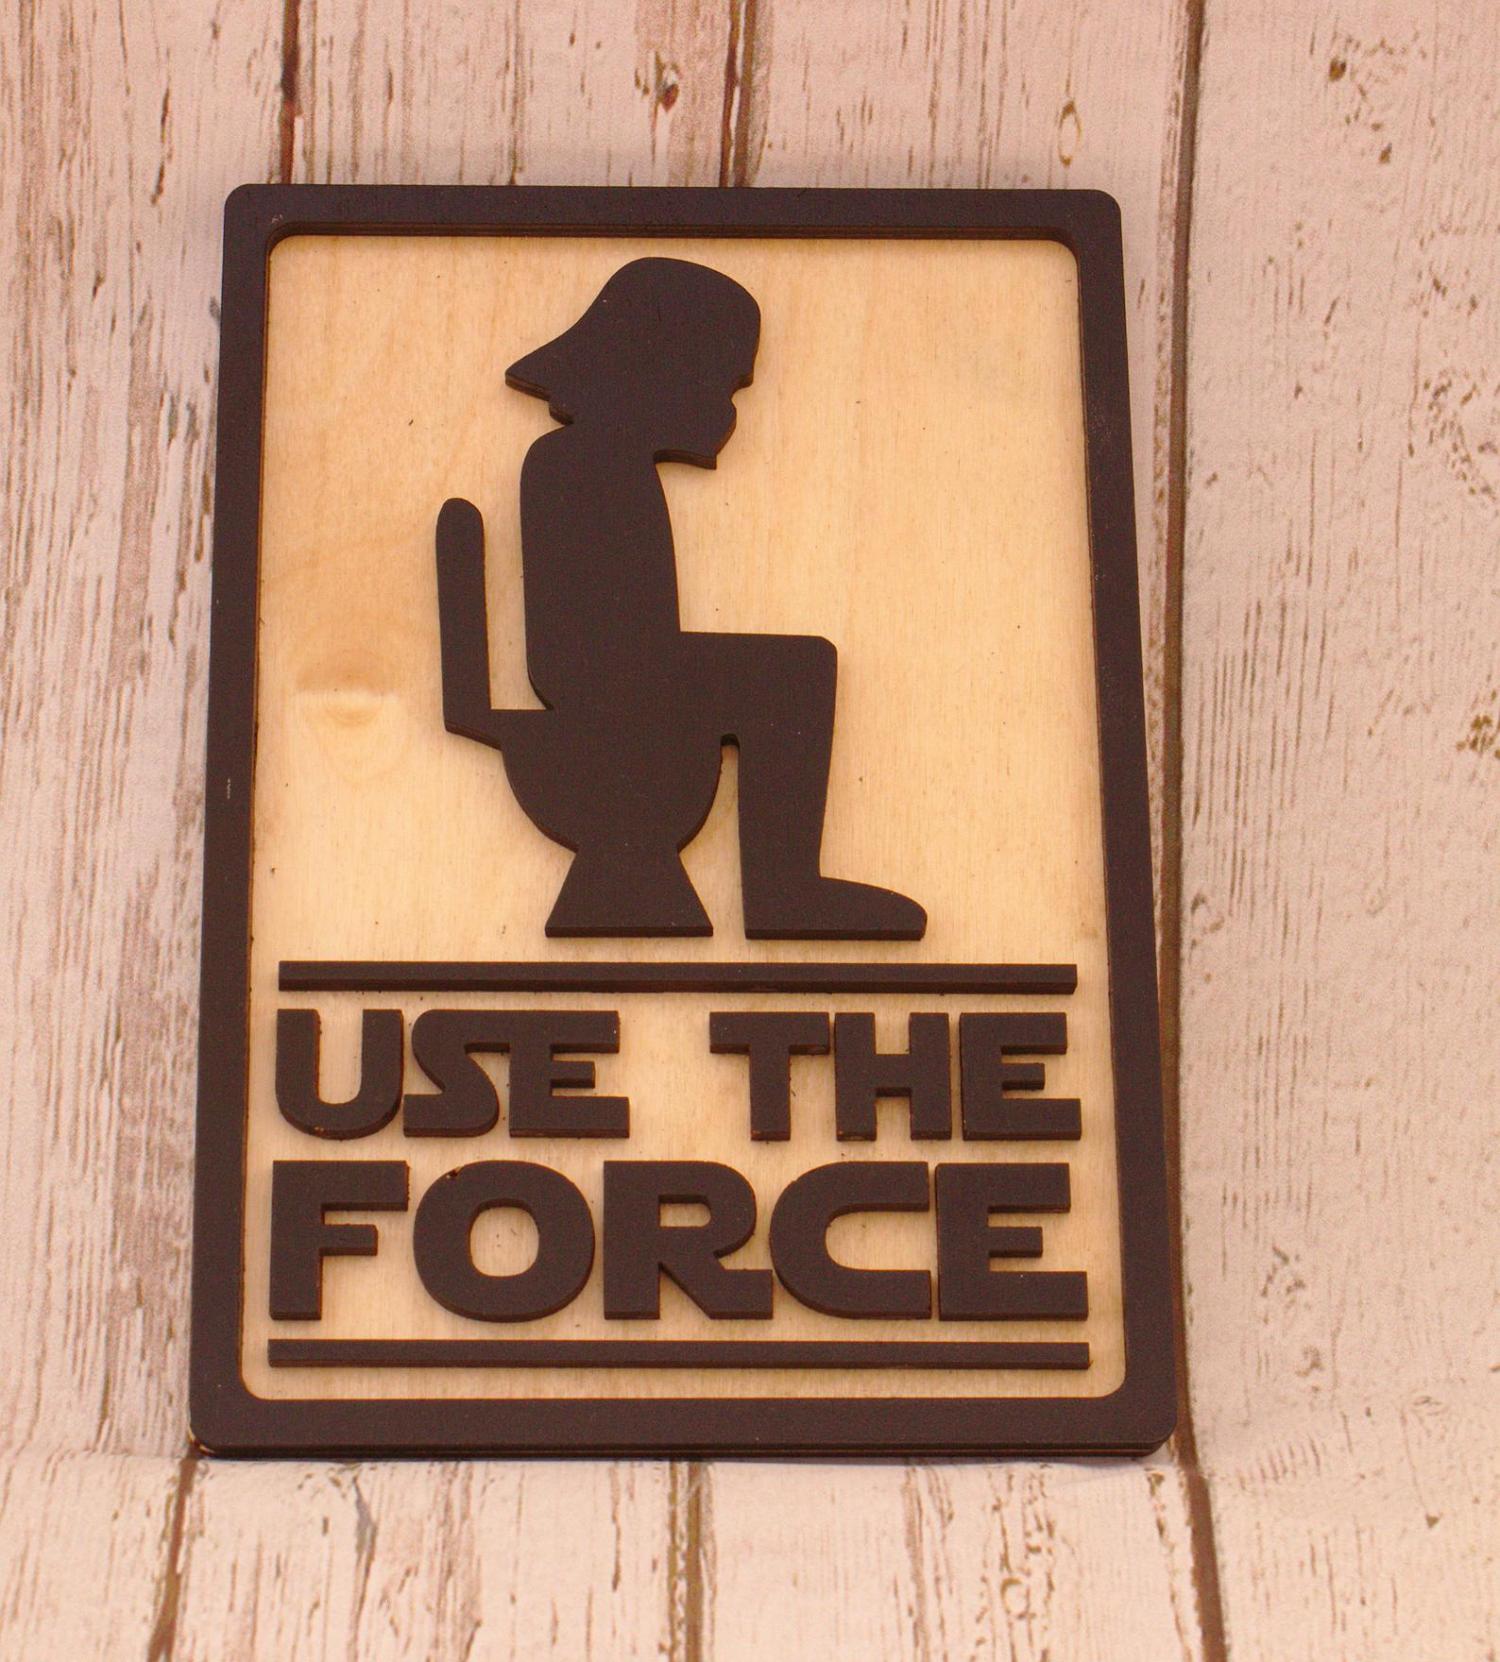 Use The Force Star Wars Toilet Bathroom Sign - Funny Star Wars Bathroom Sign